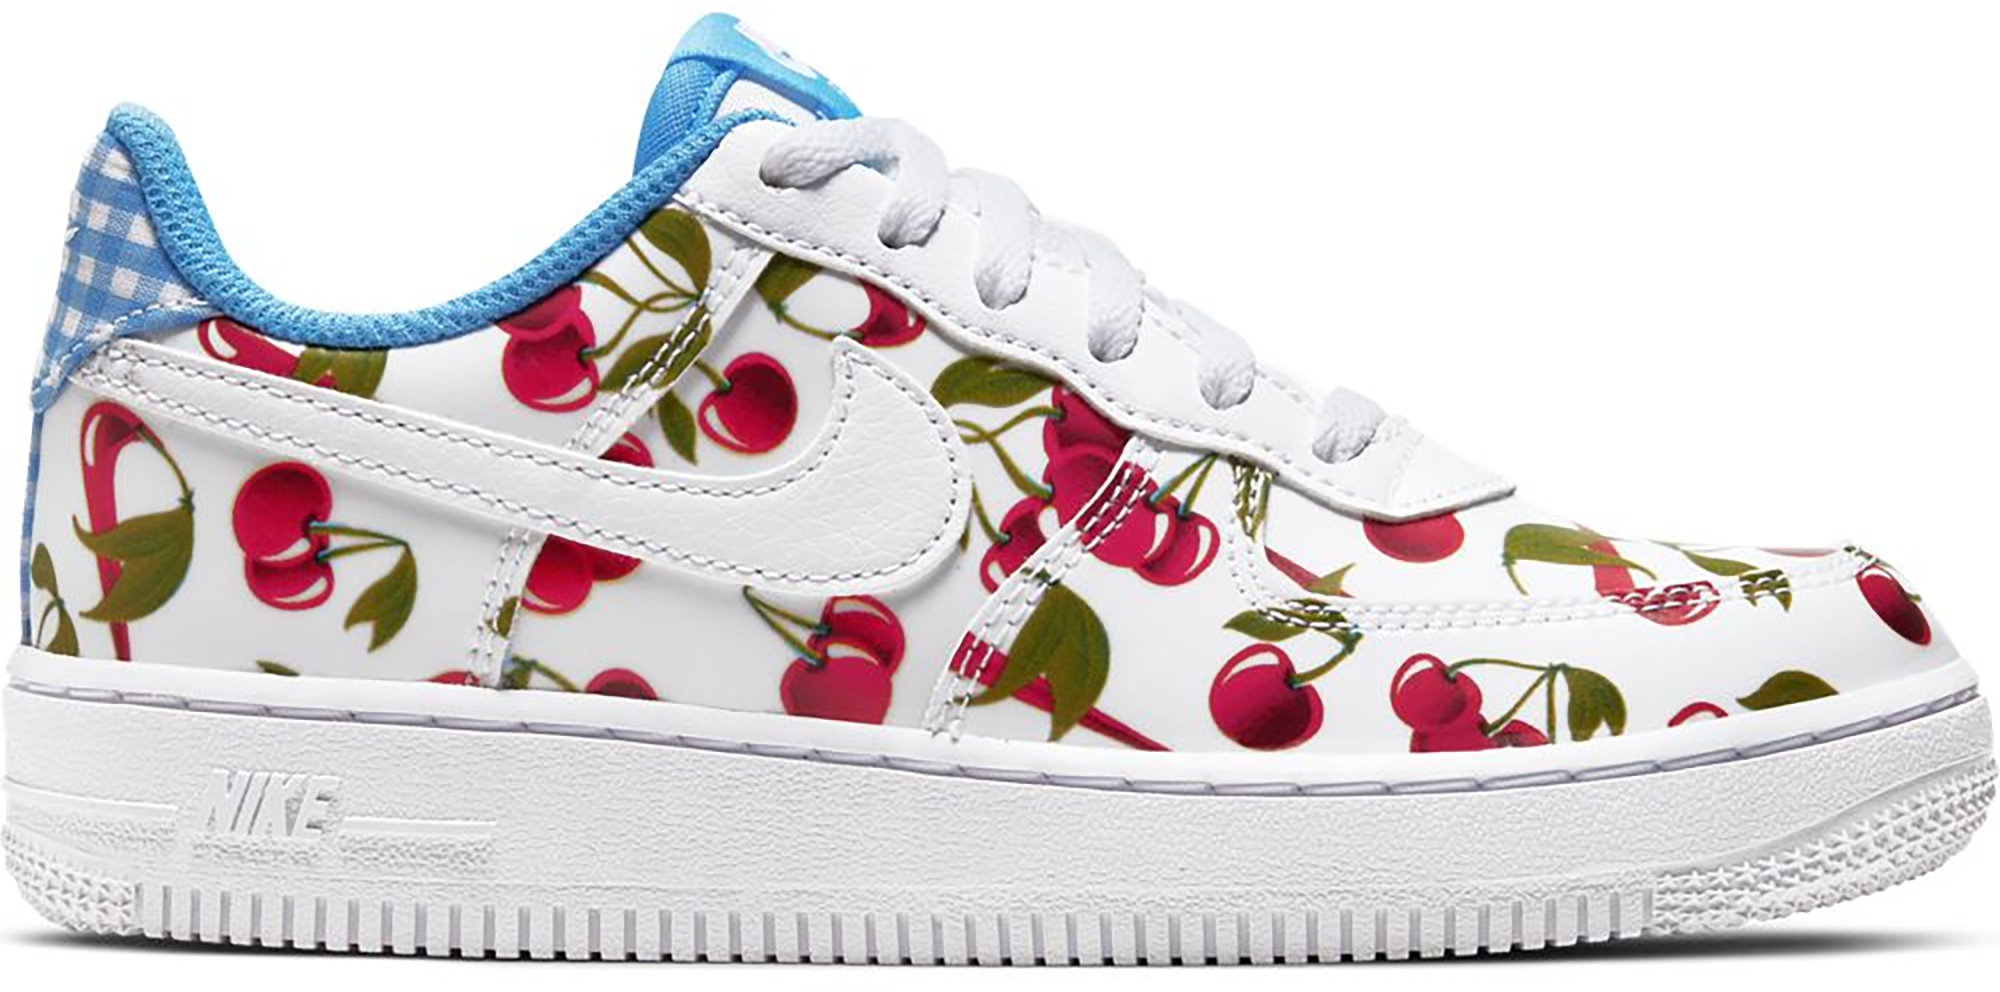 nike air force 1 with cherries